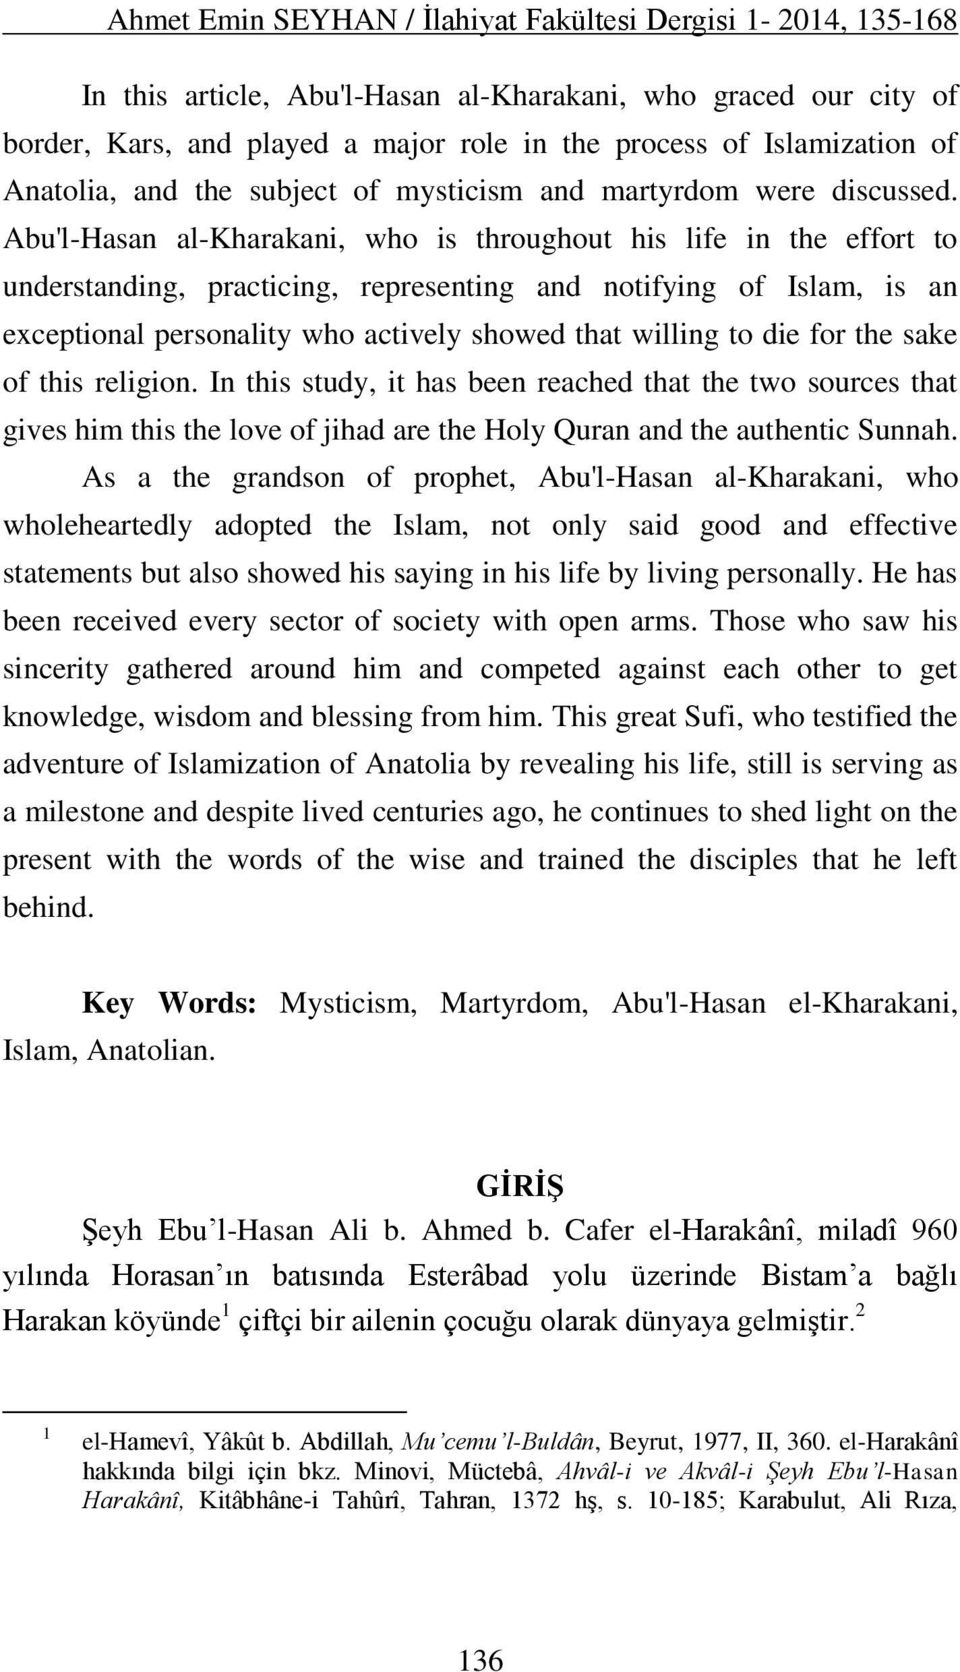 Abu'l-Hasan al-kharakani, who is throughout his life in the effort to understanding, practicing, representing and notifying of Islam, is an exceptional personality who actively showed that willing to